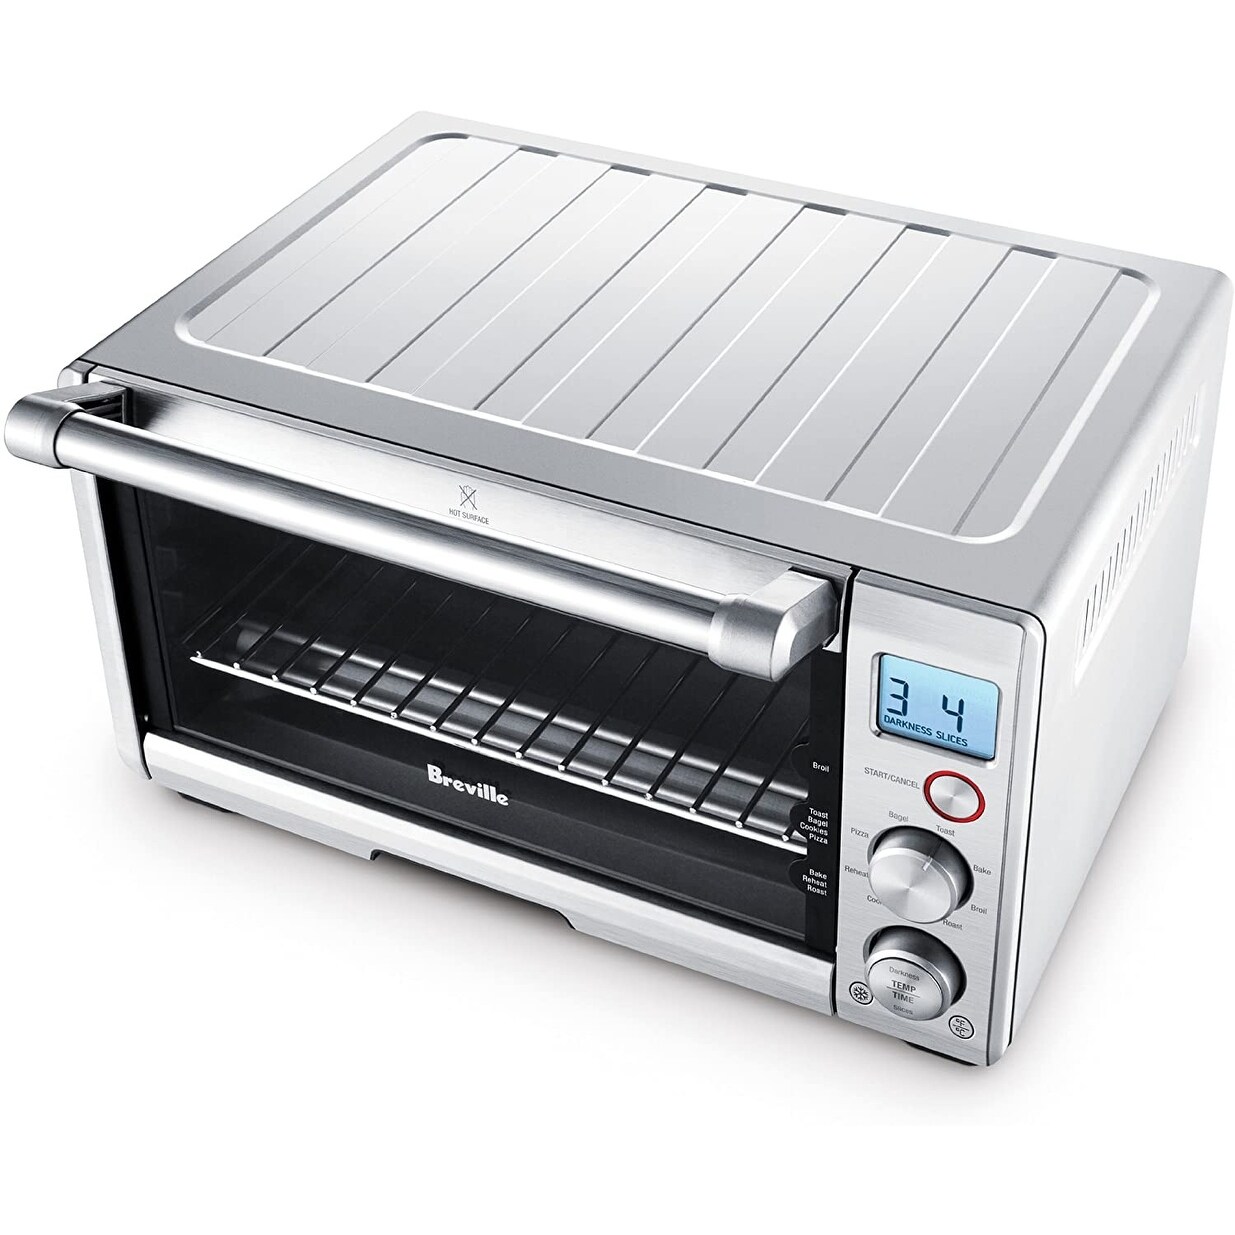 https://ak1.ostkcdn.com/images/products/is/images/direct/873b6a1cc37760e15cfdccce4f397839817f9655/Breville-Compact-Smart-Toaster-Oven---Brushed-Stainless-Steel.jpg